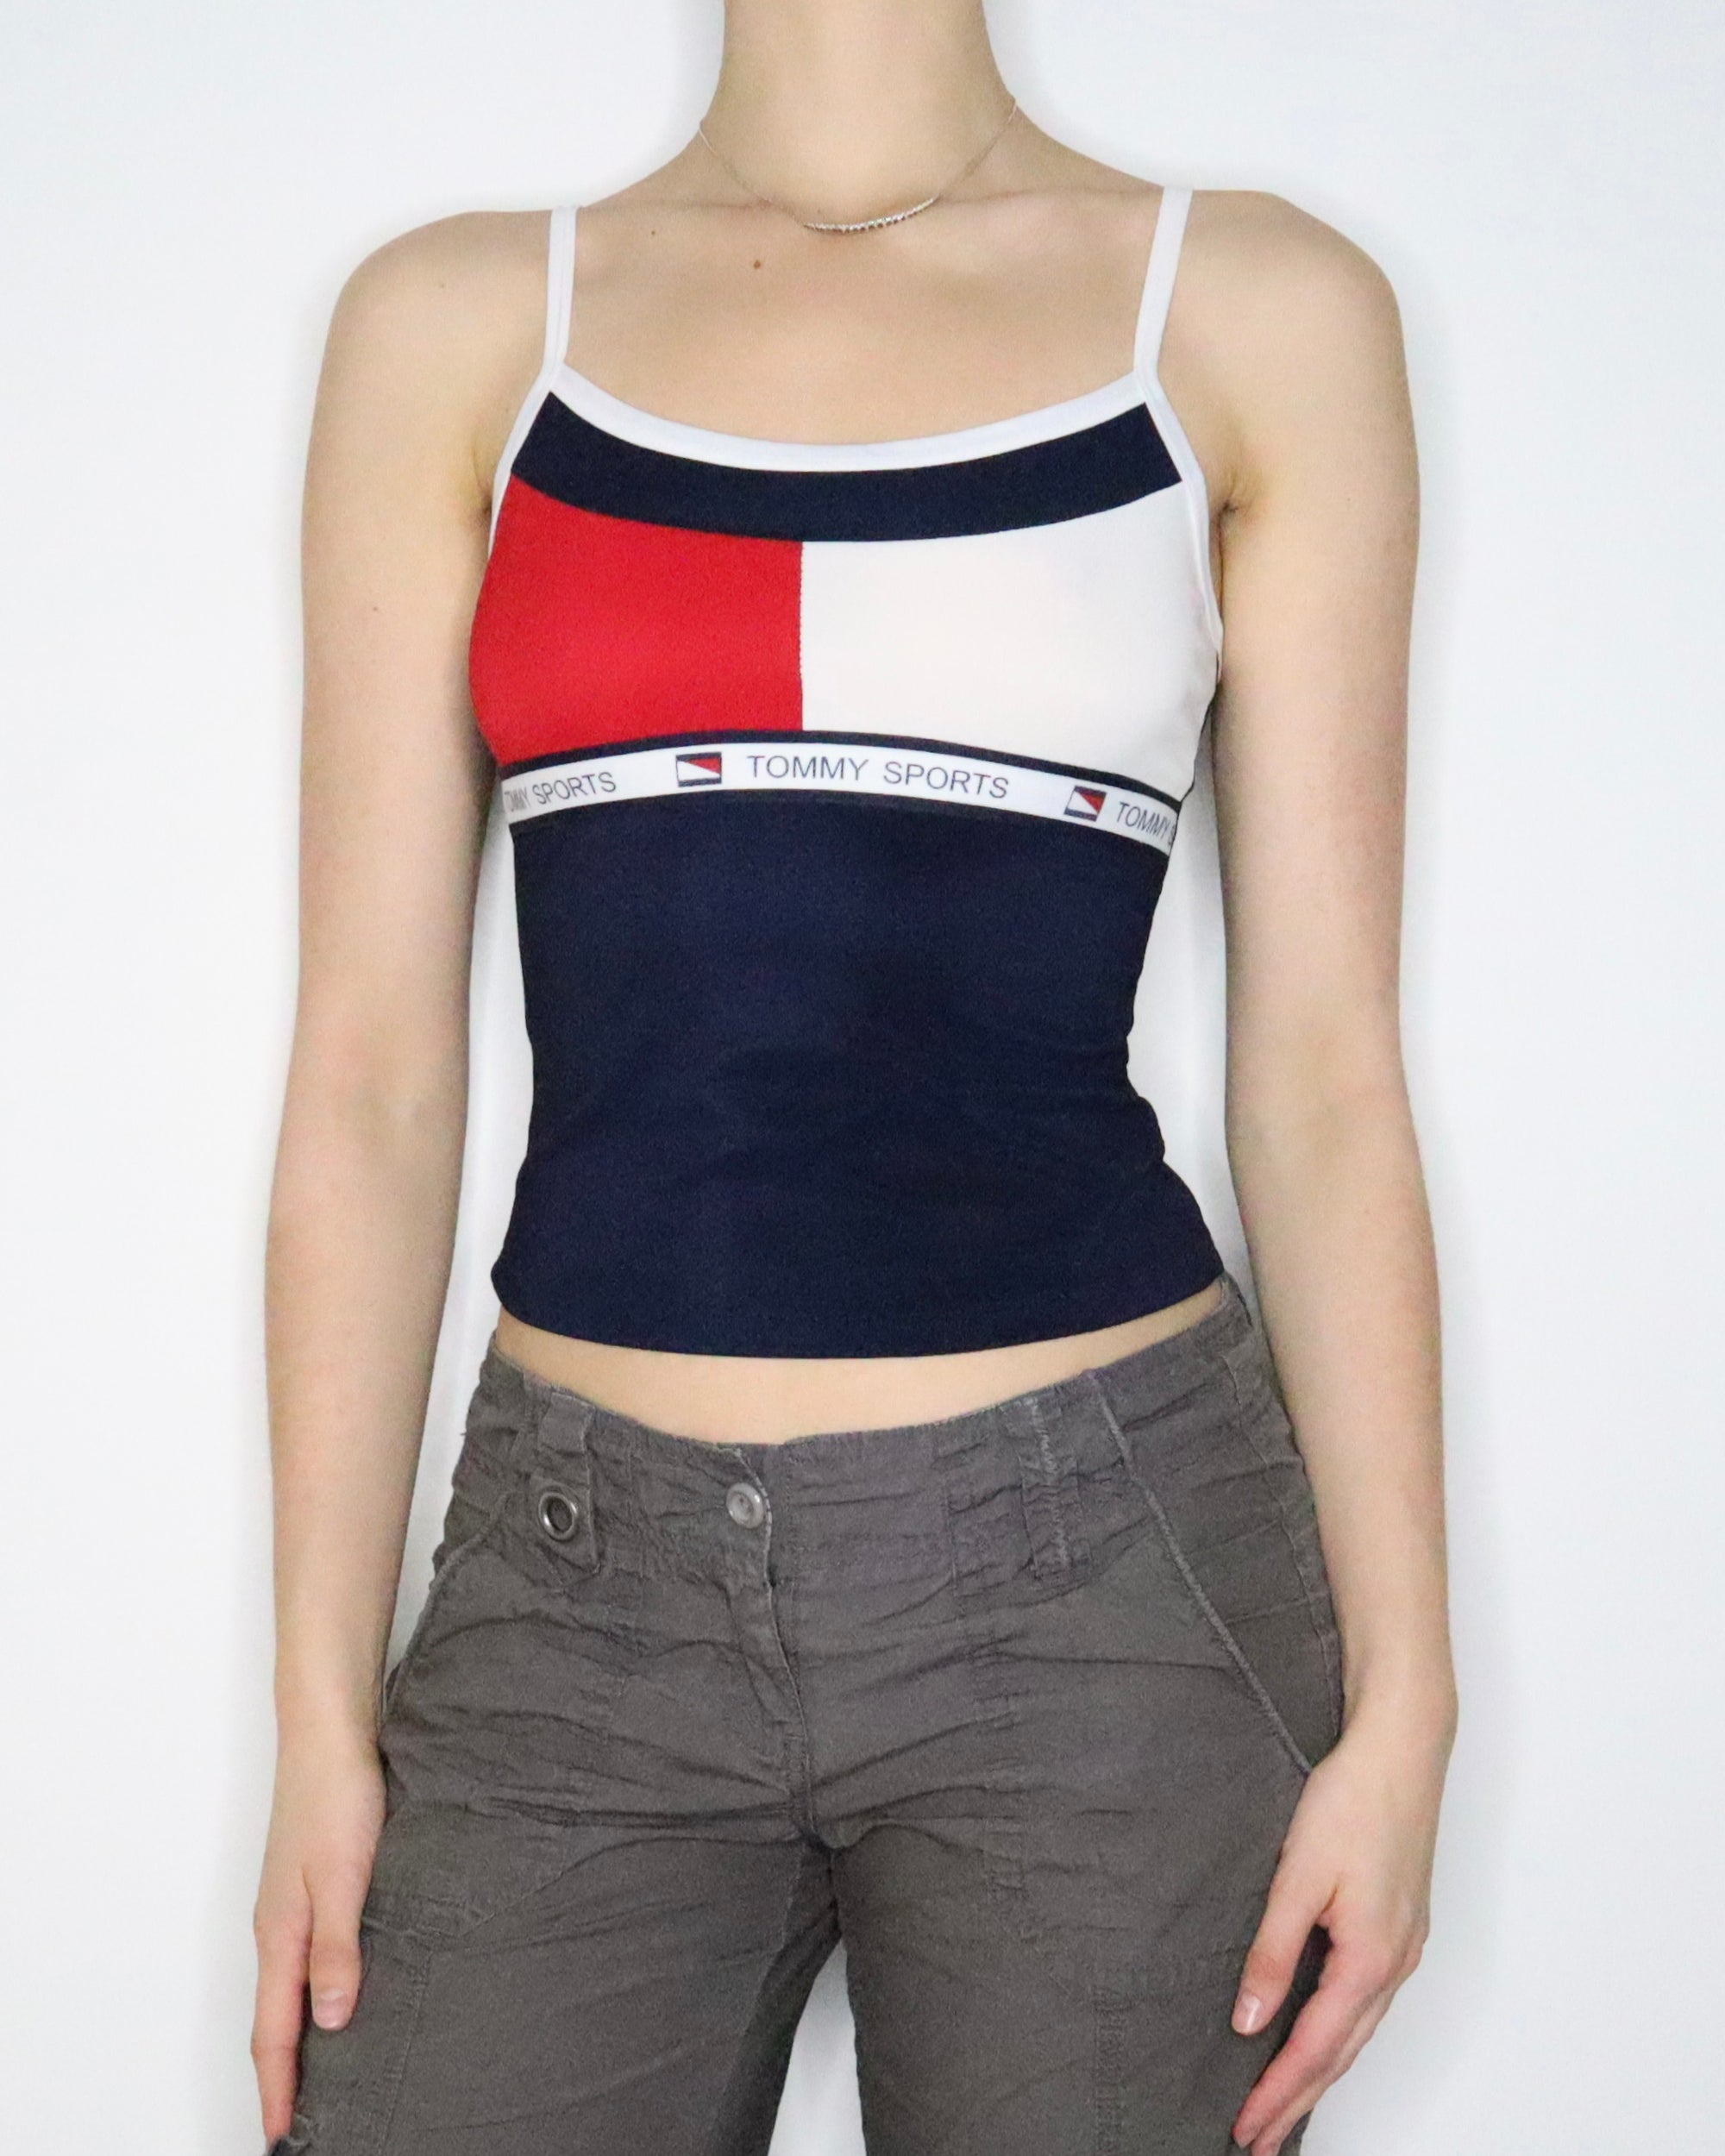 Tommy Hilfiger Camisole (Small) 